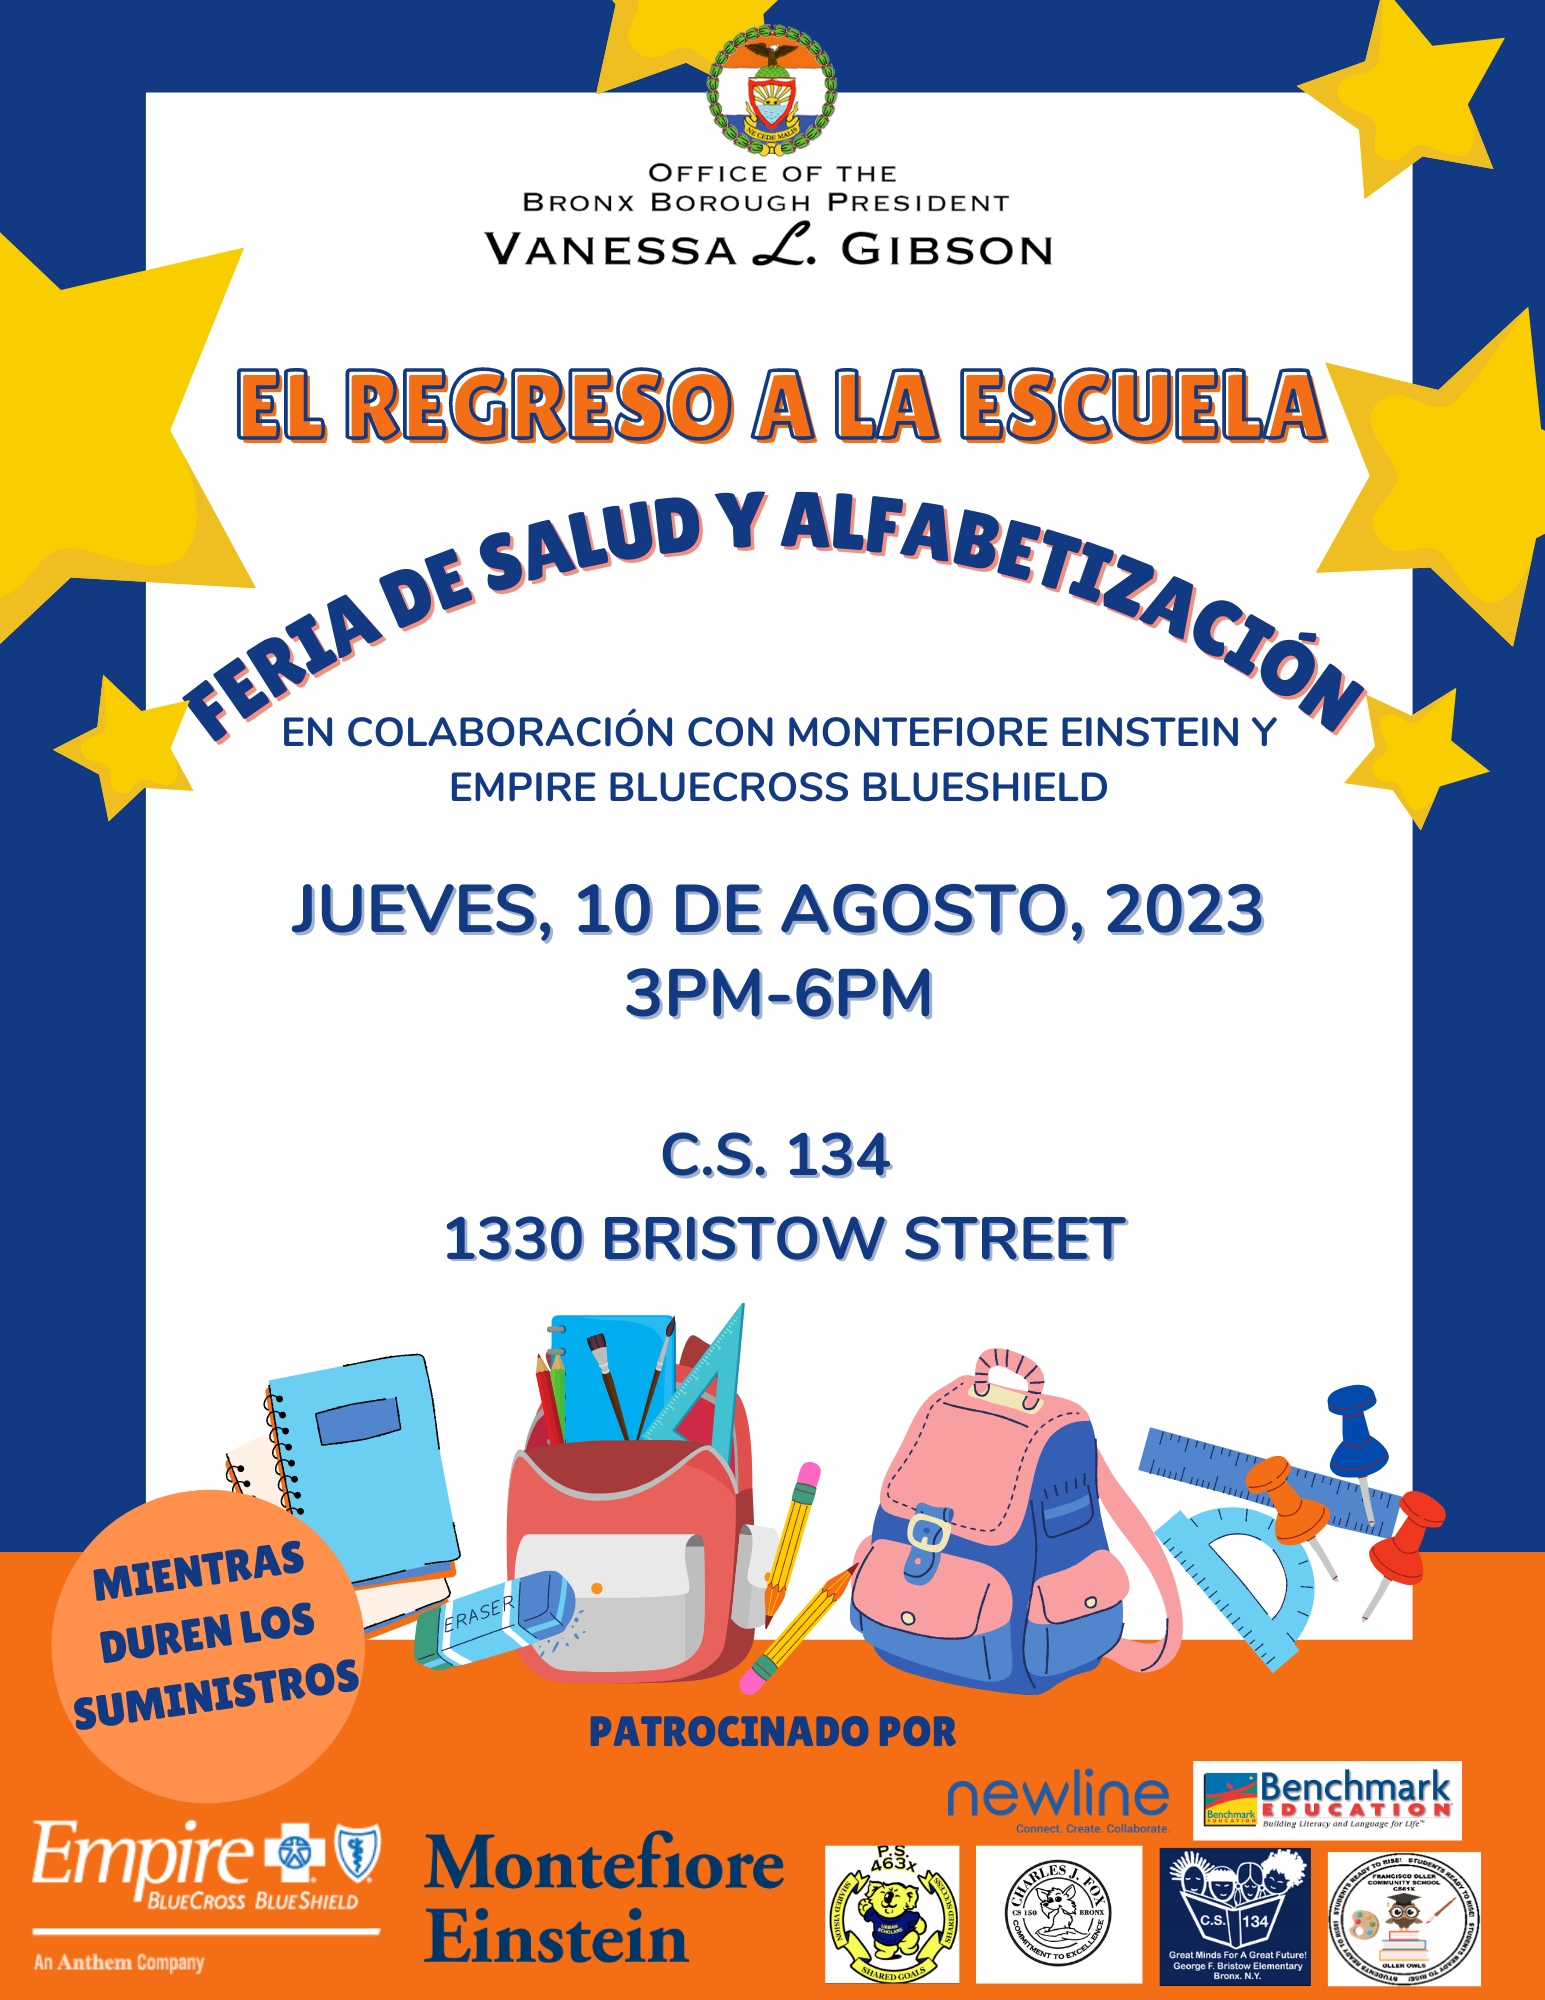 A flyer in Spanish for the Bronx Back to School Health & Literacy Fair on August 10, 2023.